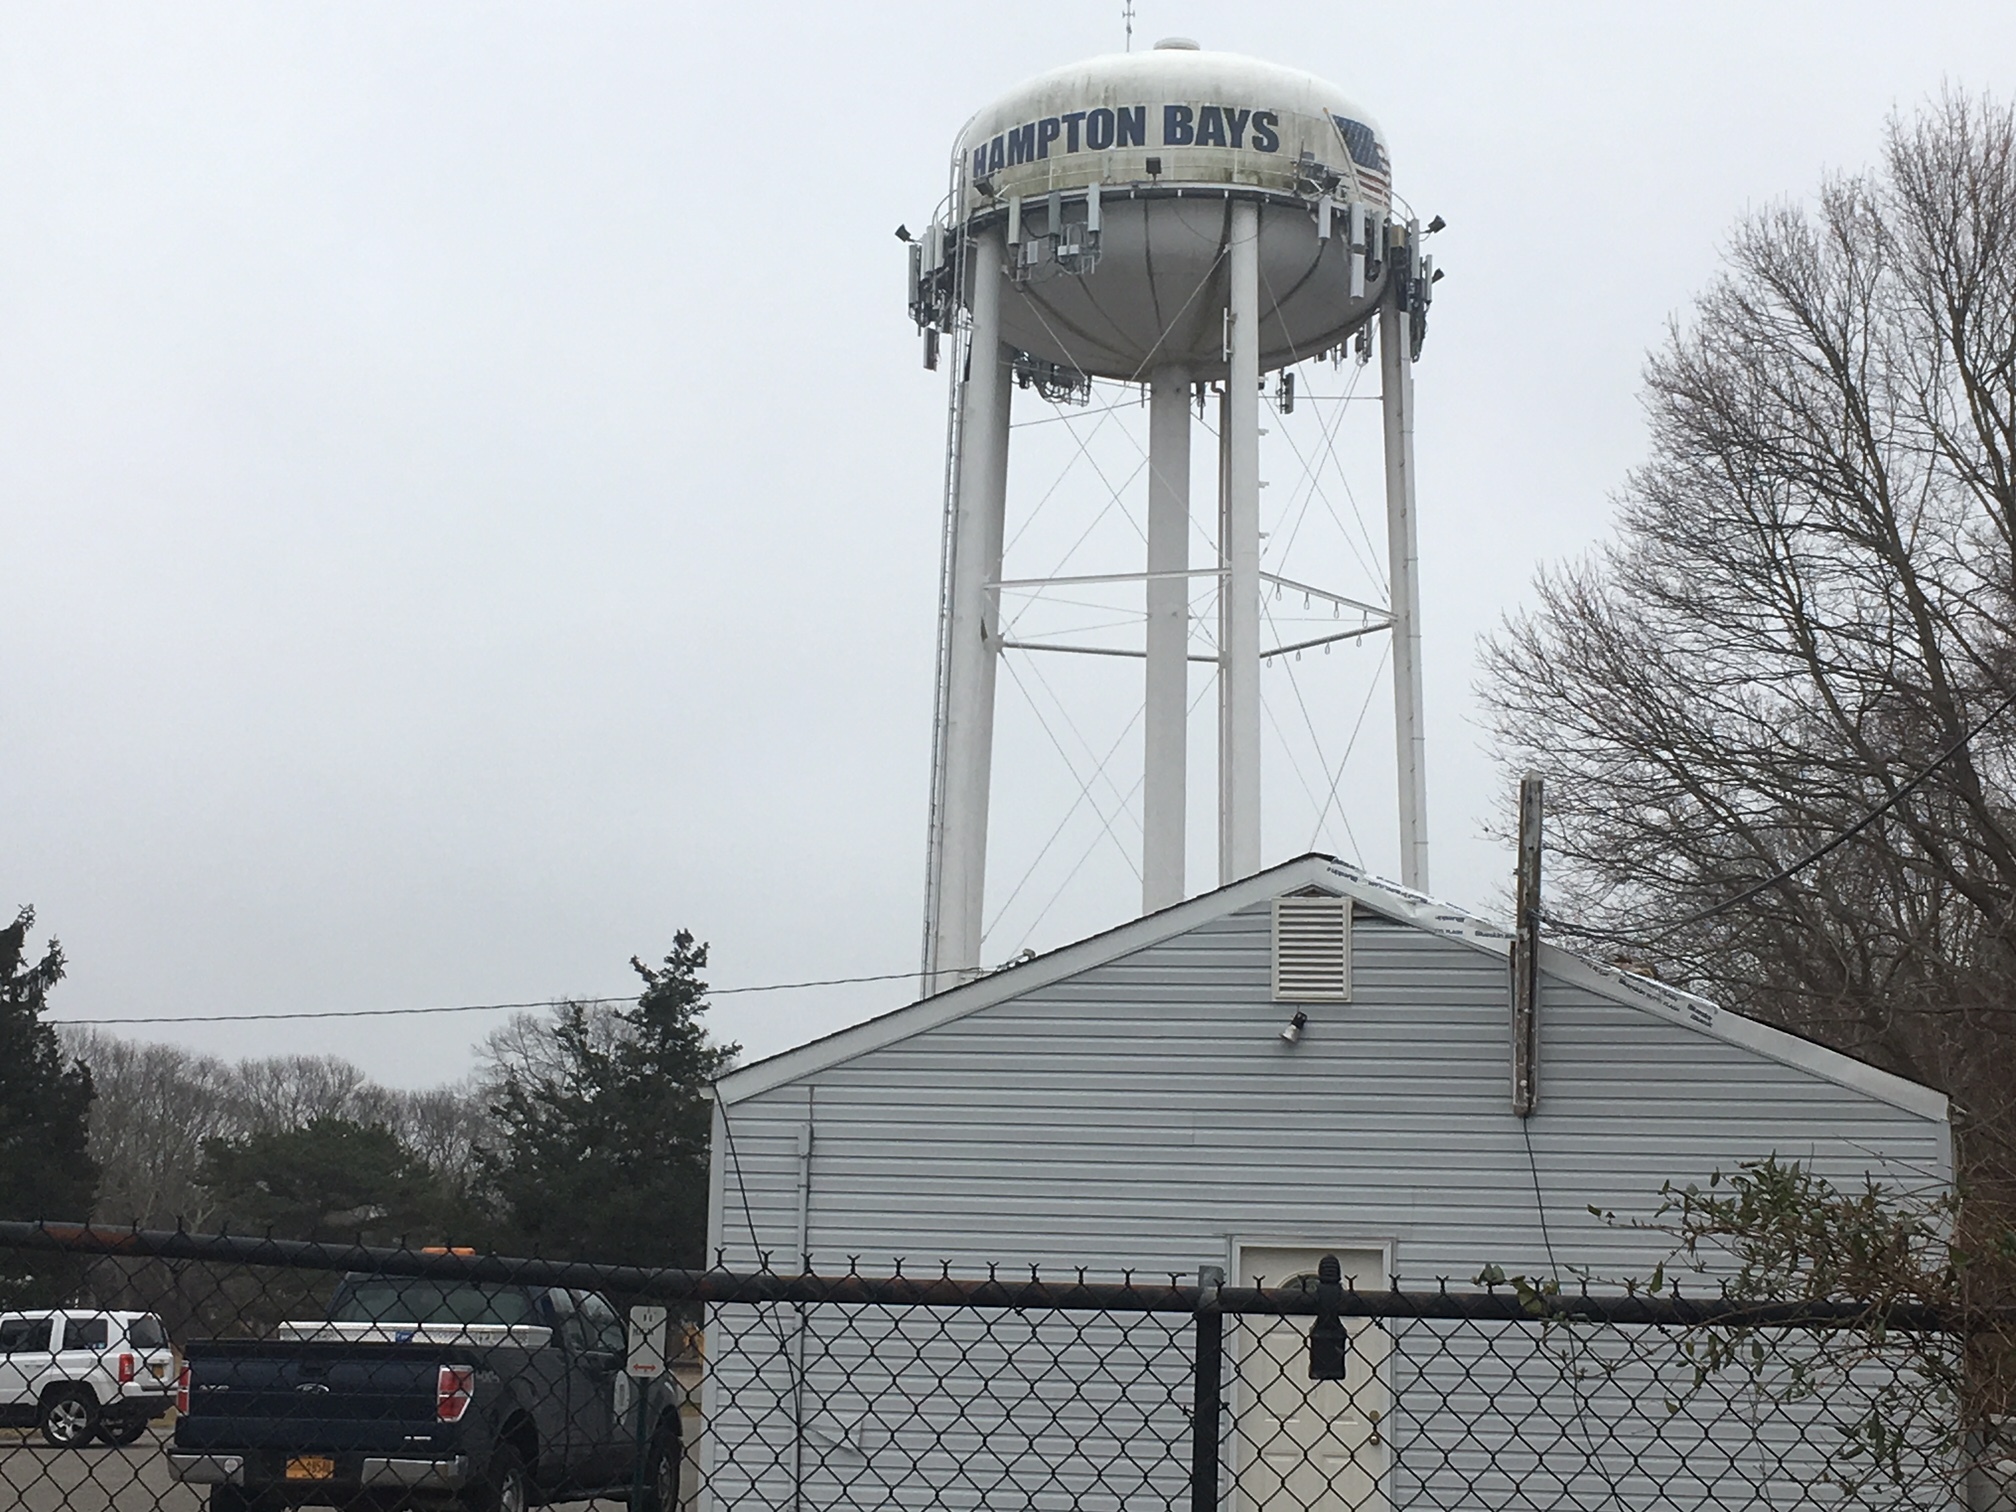 The Hampton Bays Water District Facility 1 off Ponquogue Avenue.  KITTY MERRILL